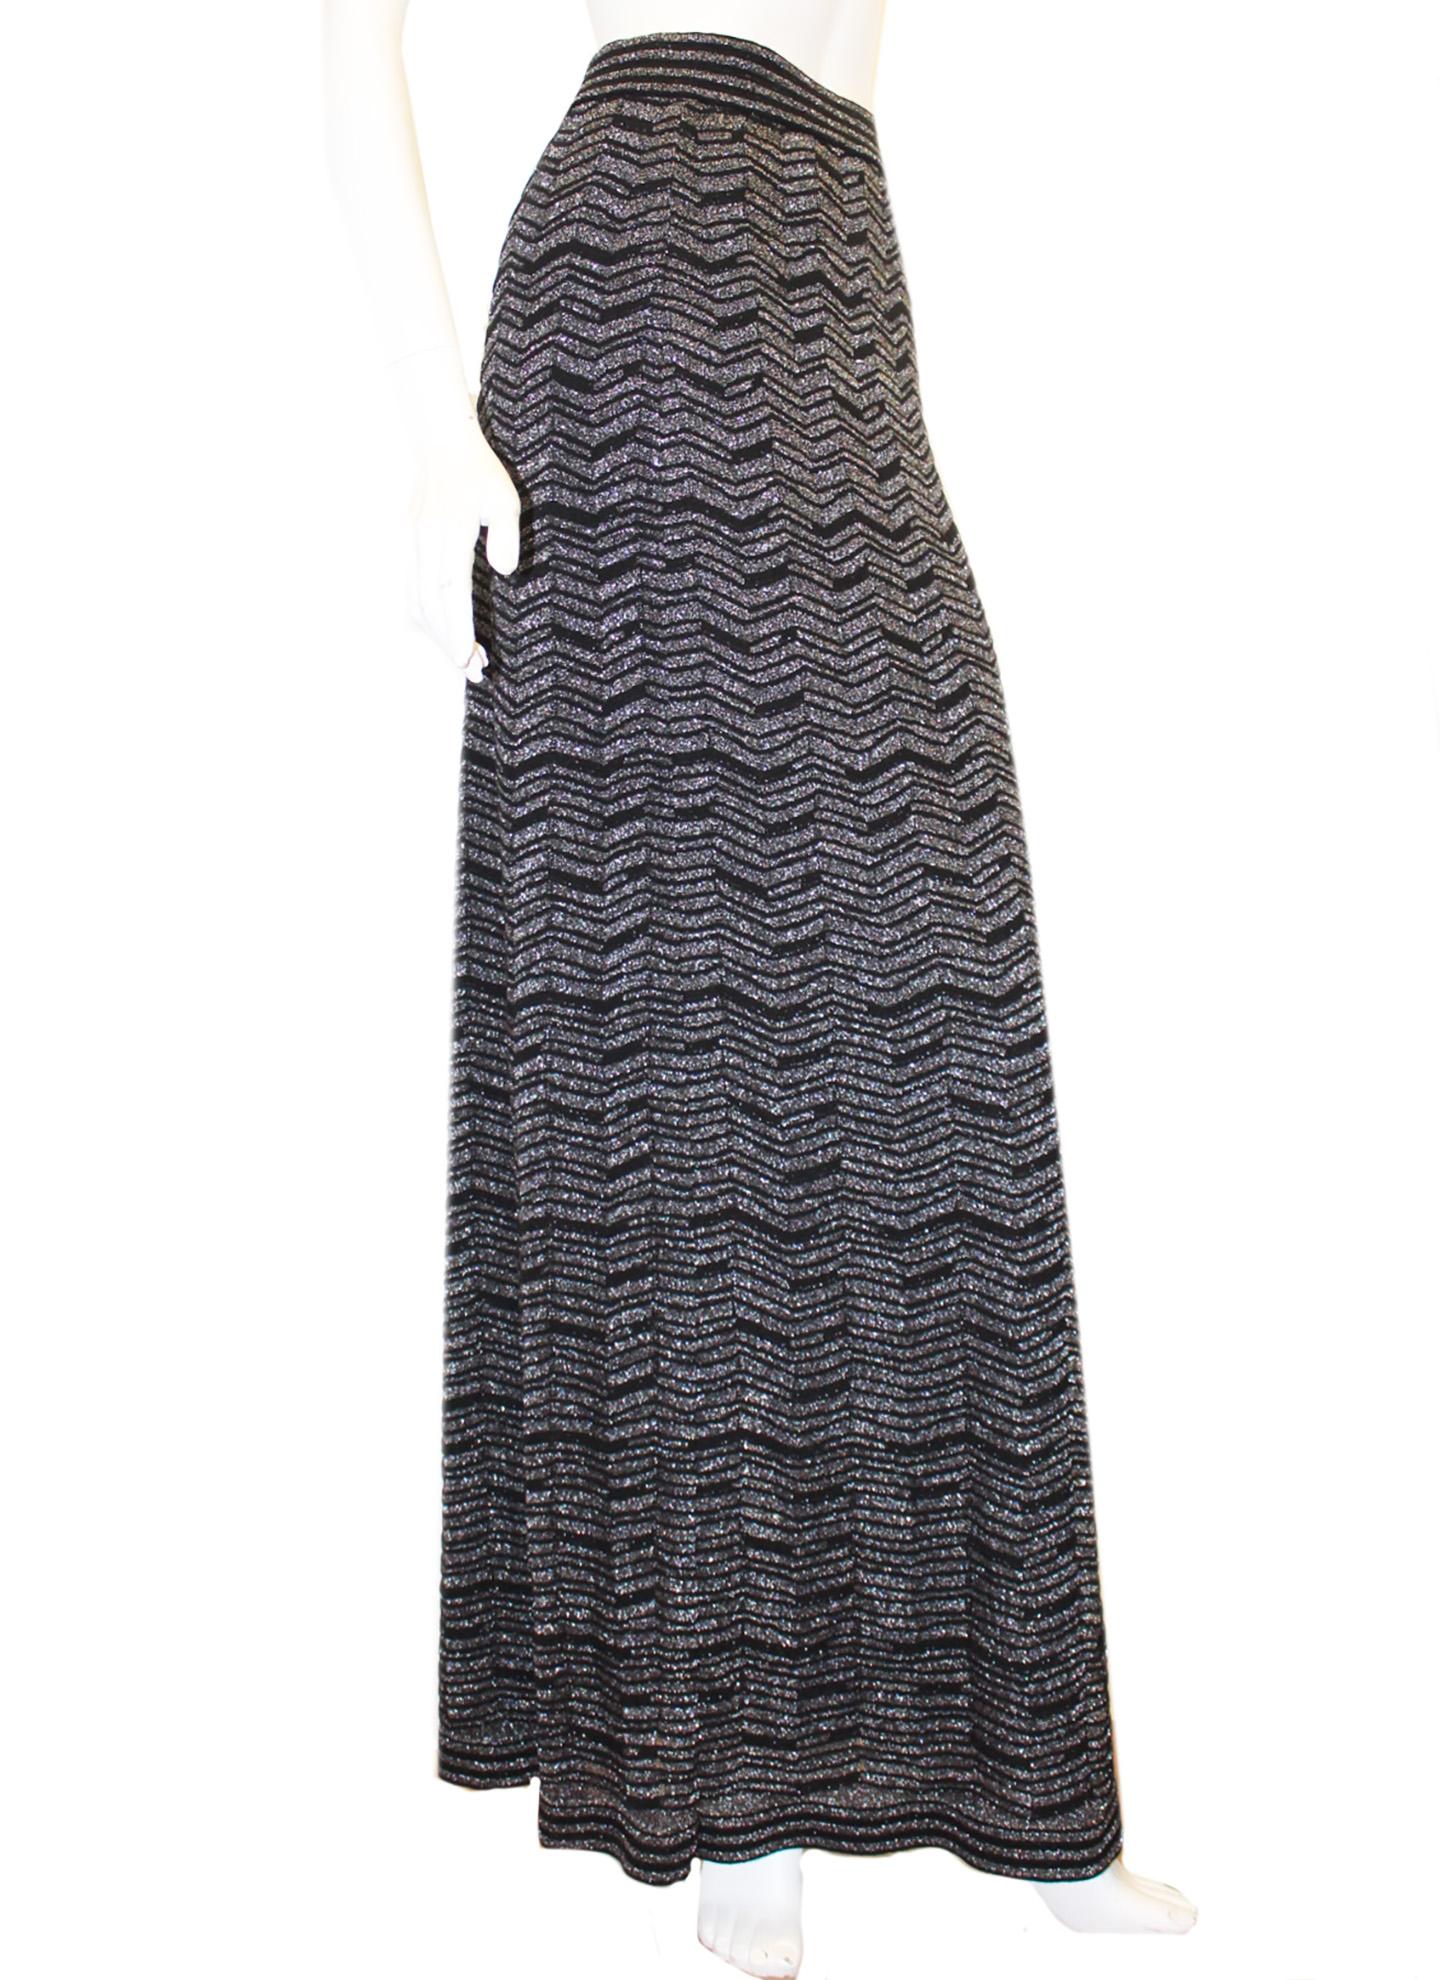 Missoni Metallic Black & Silver Tone Maxi Skirt  In Excellent Condition For Sale In Palm Beach, FL